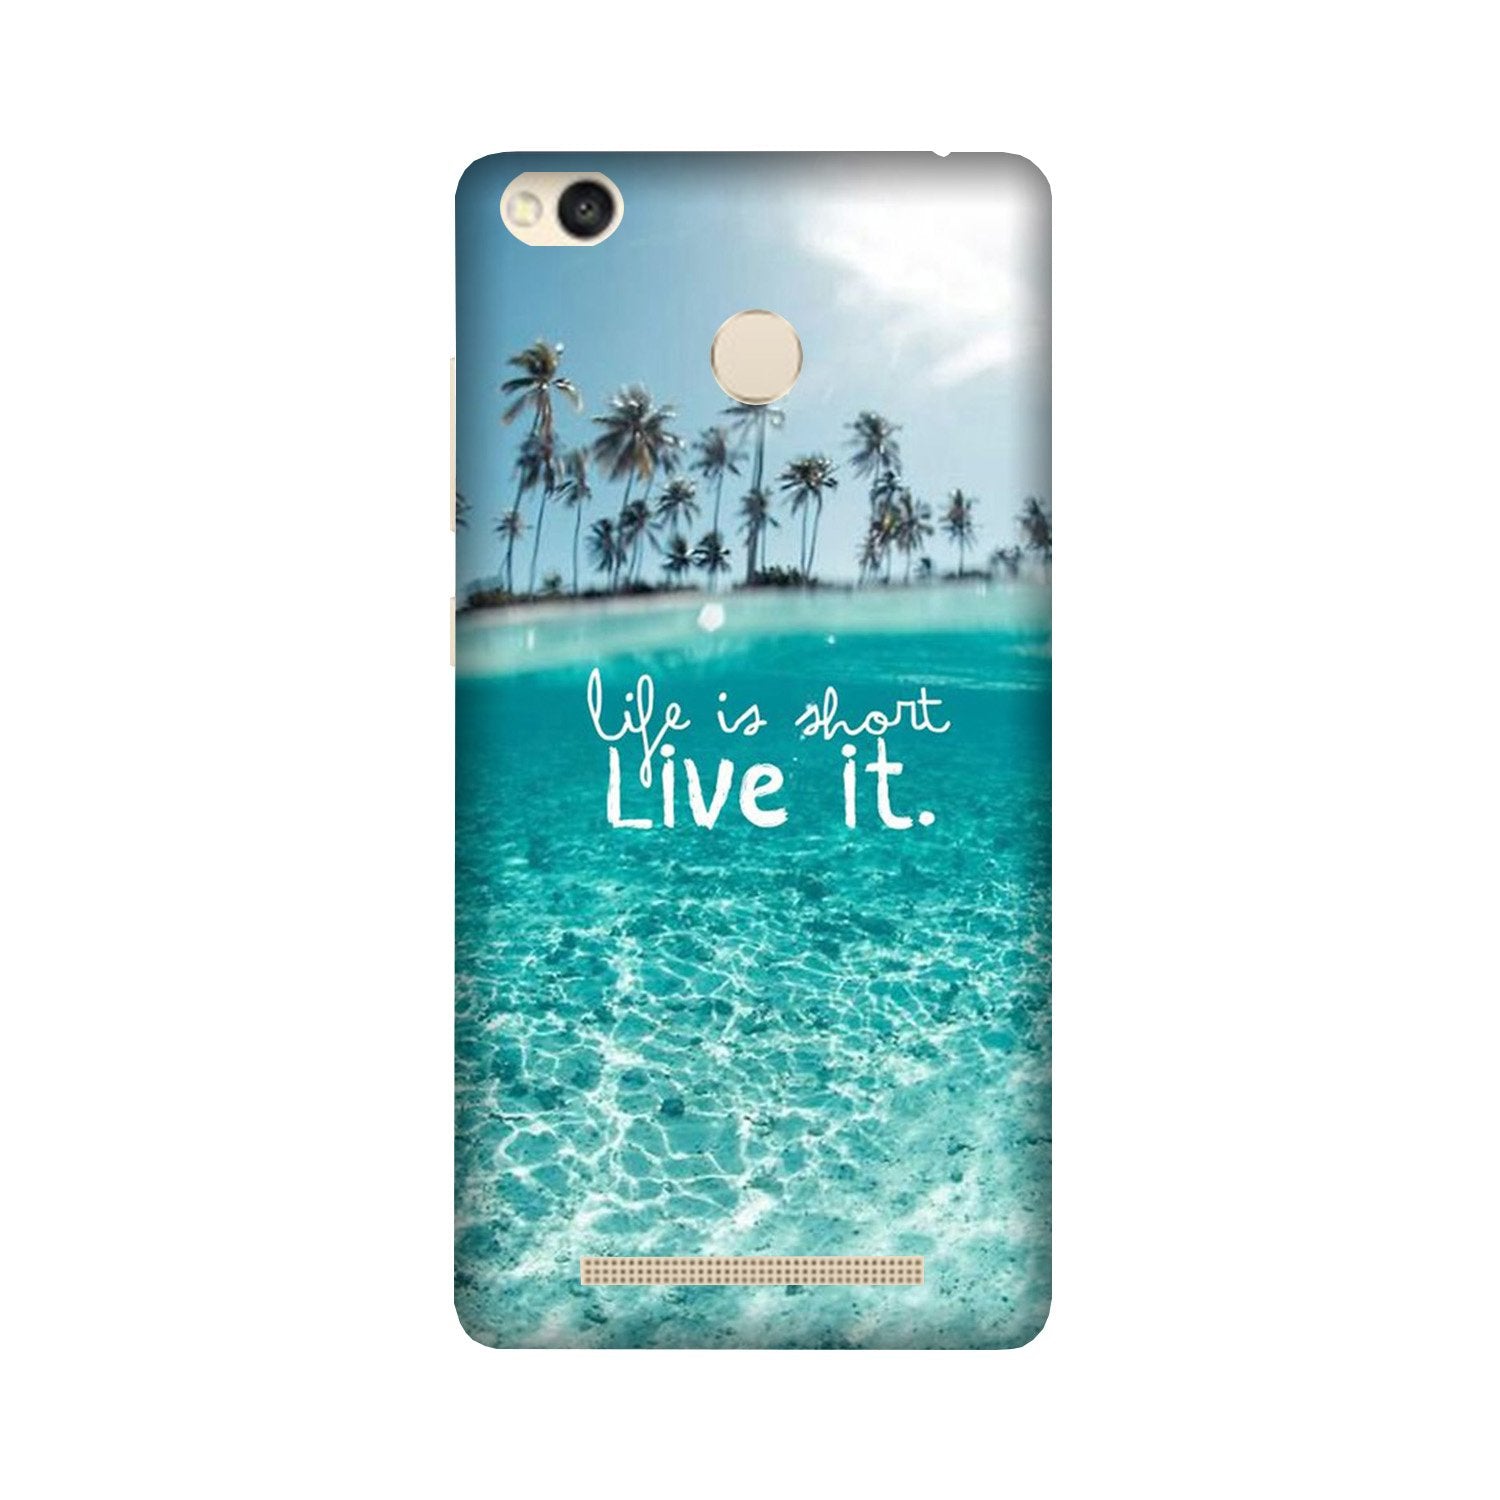 Life is short live it Case for Redmi 3S Prime